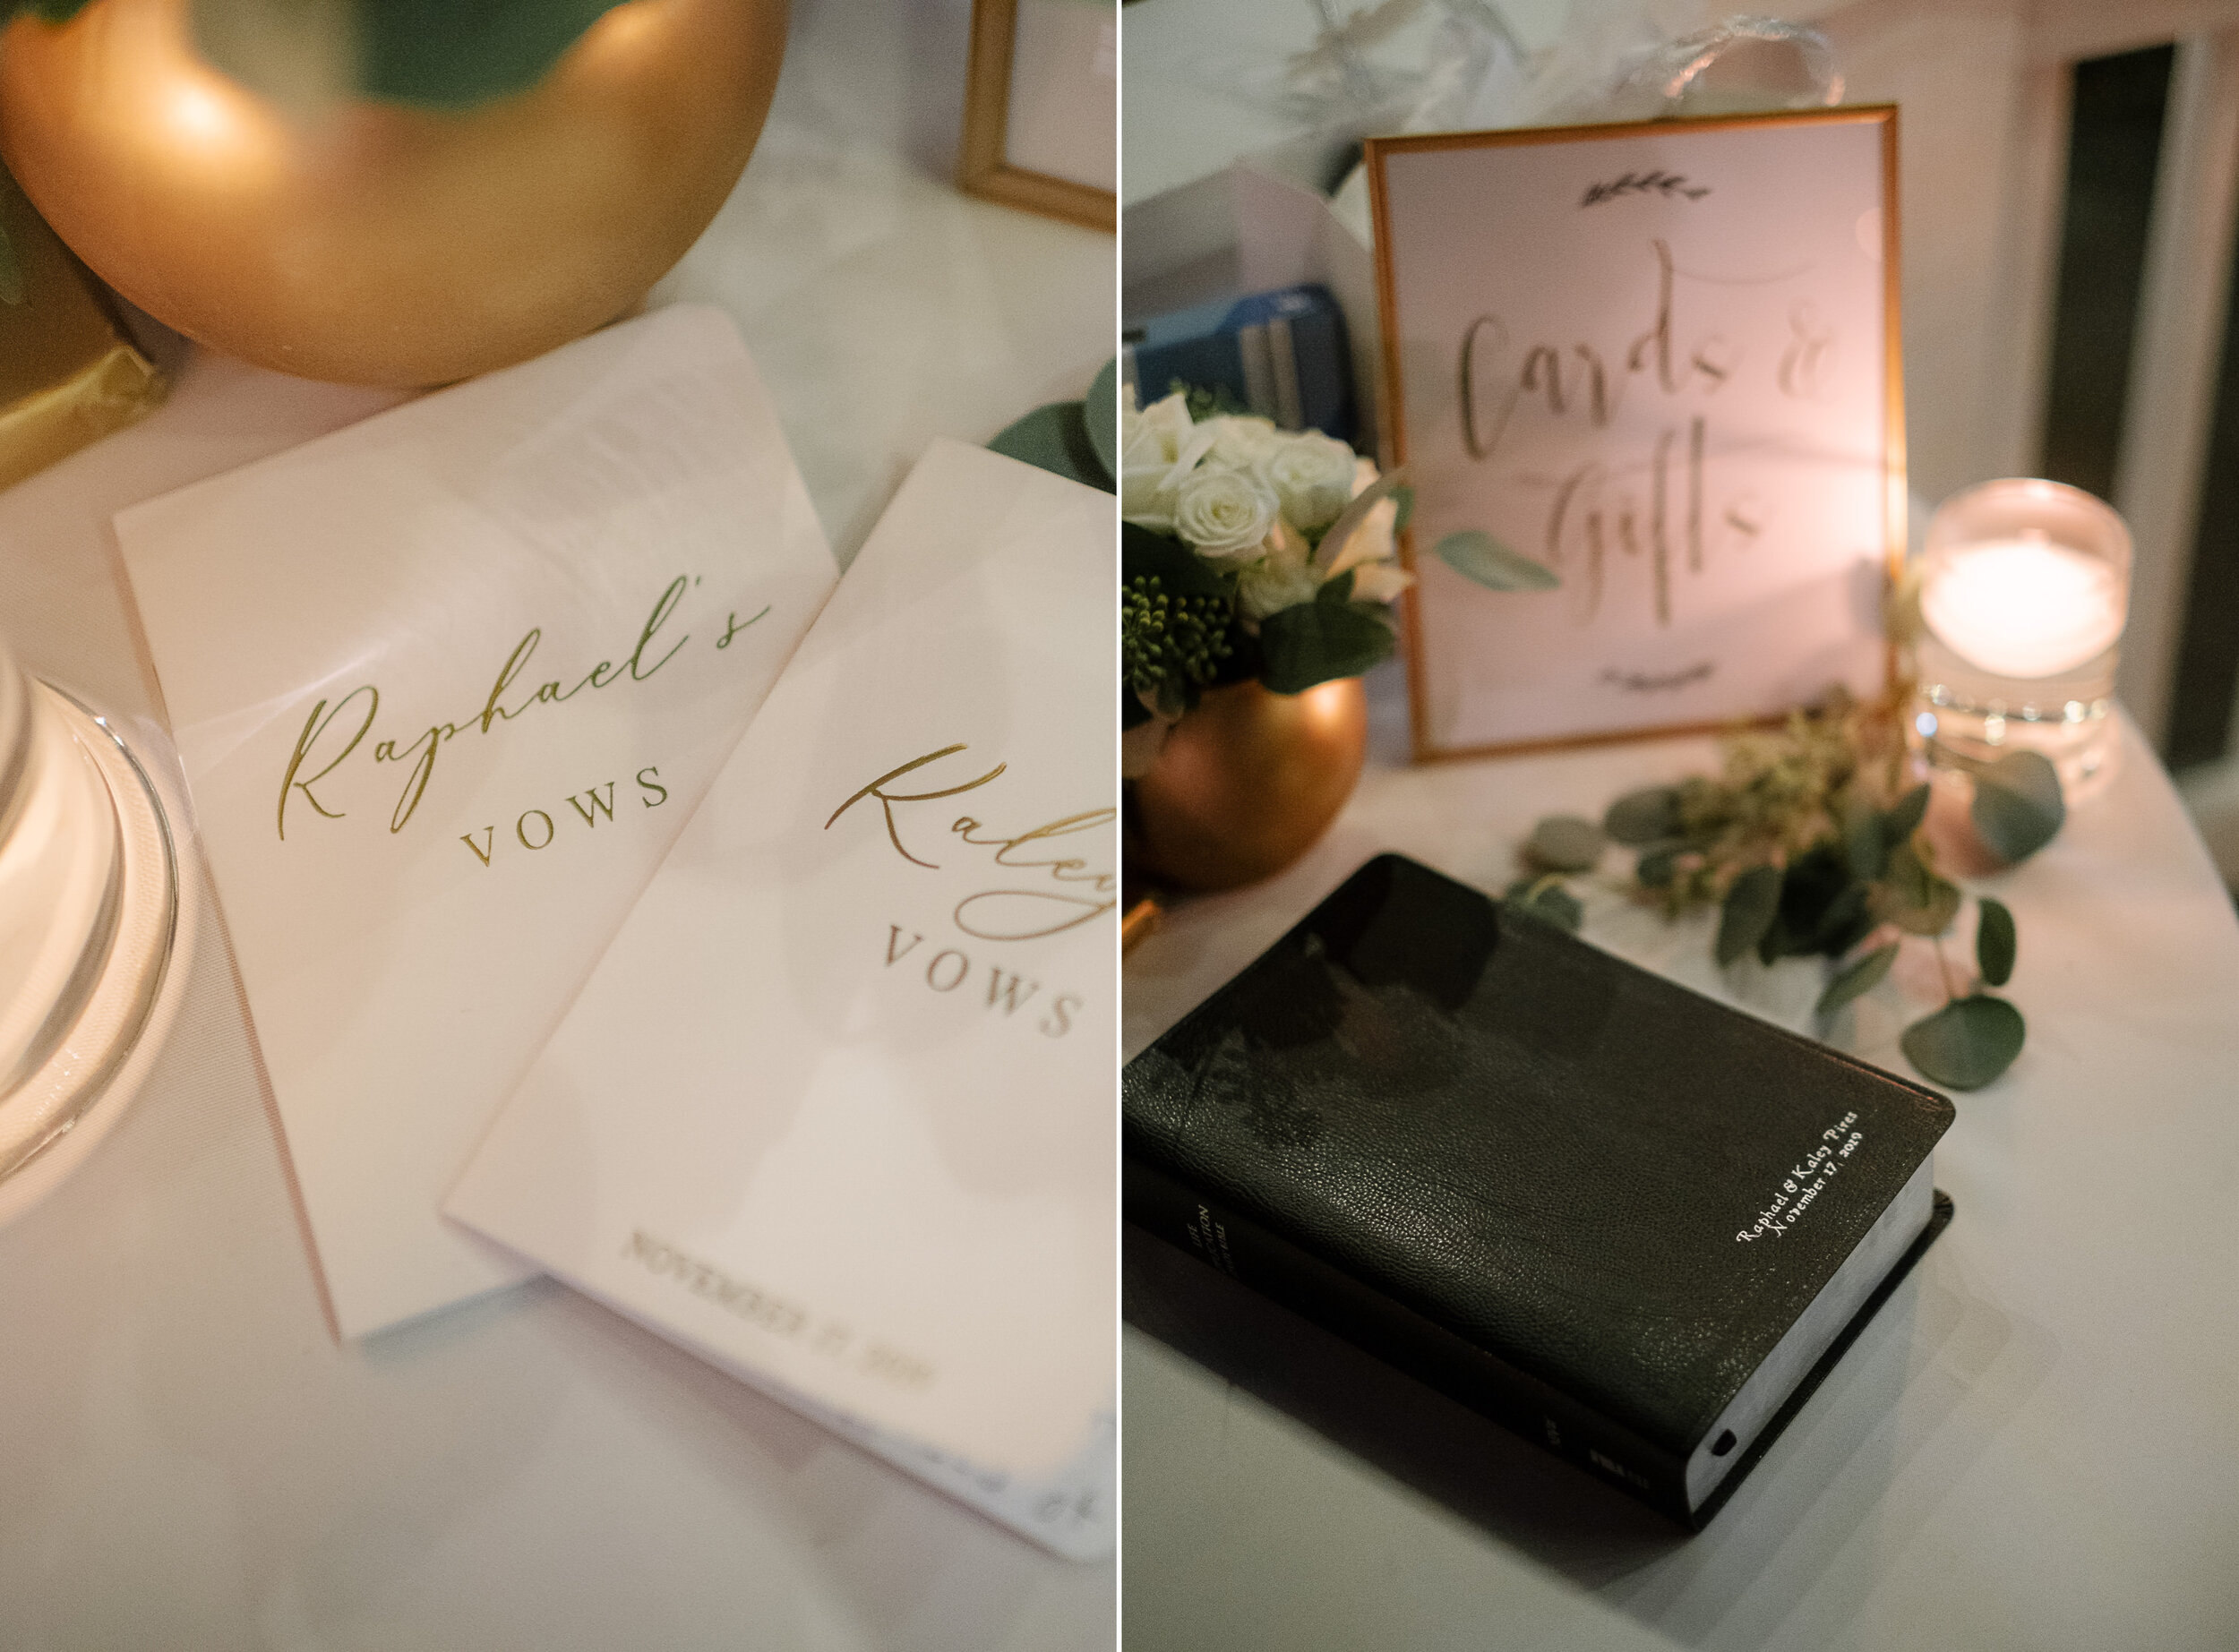  Paraise Cove Wedding by Sunglow Photography in Orlando, FL 